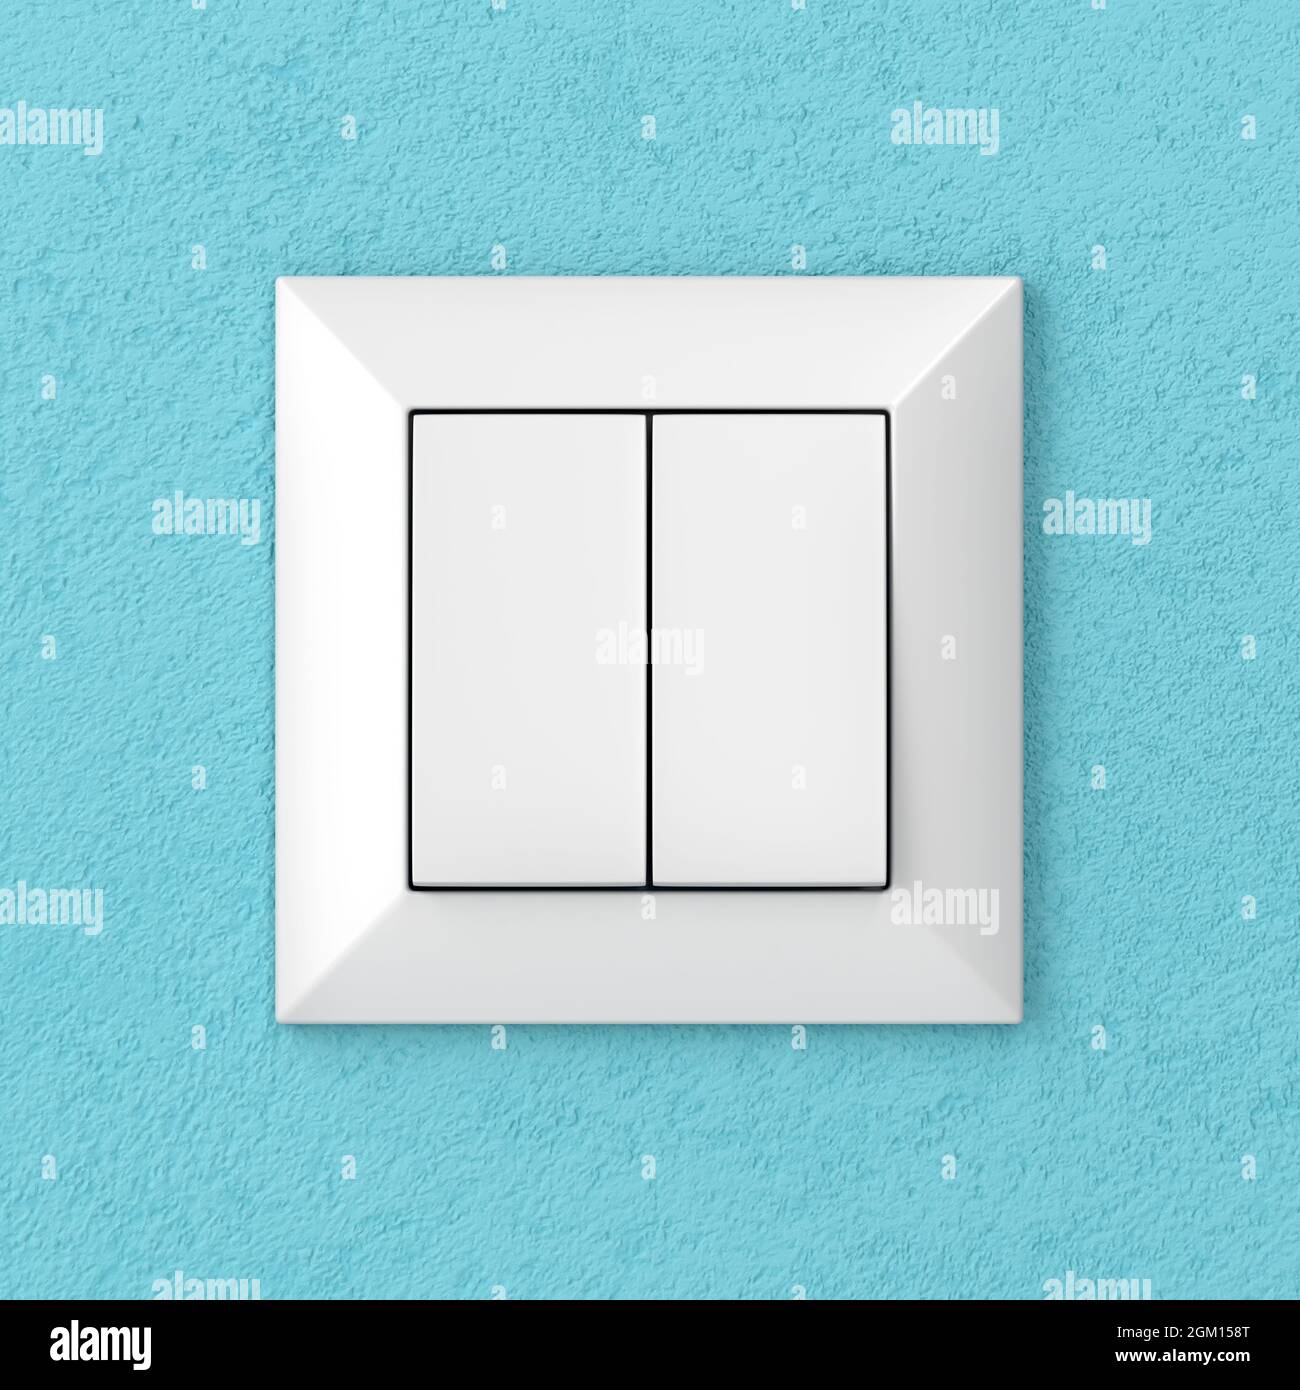 Double light switch on blue wall, front view Stock Photo